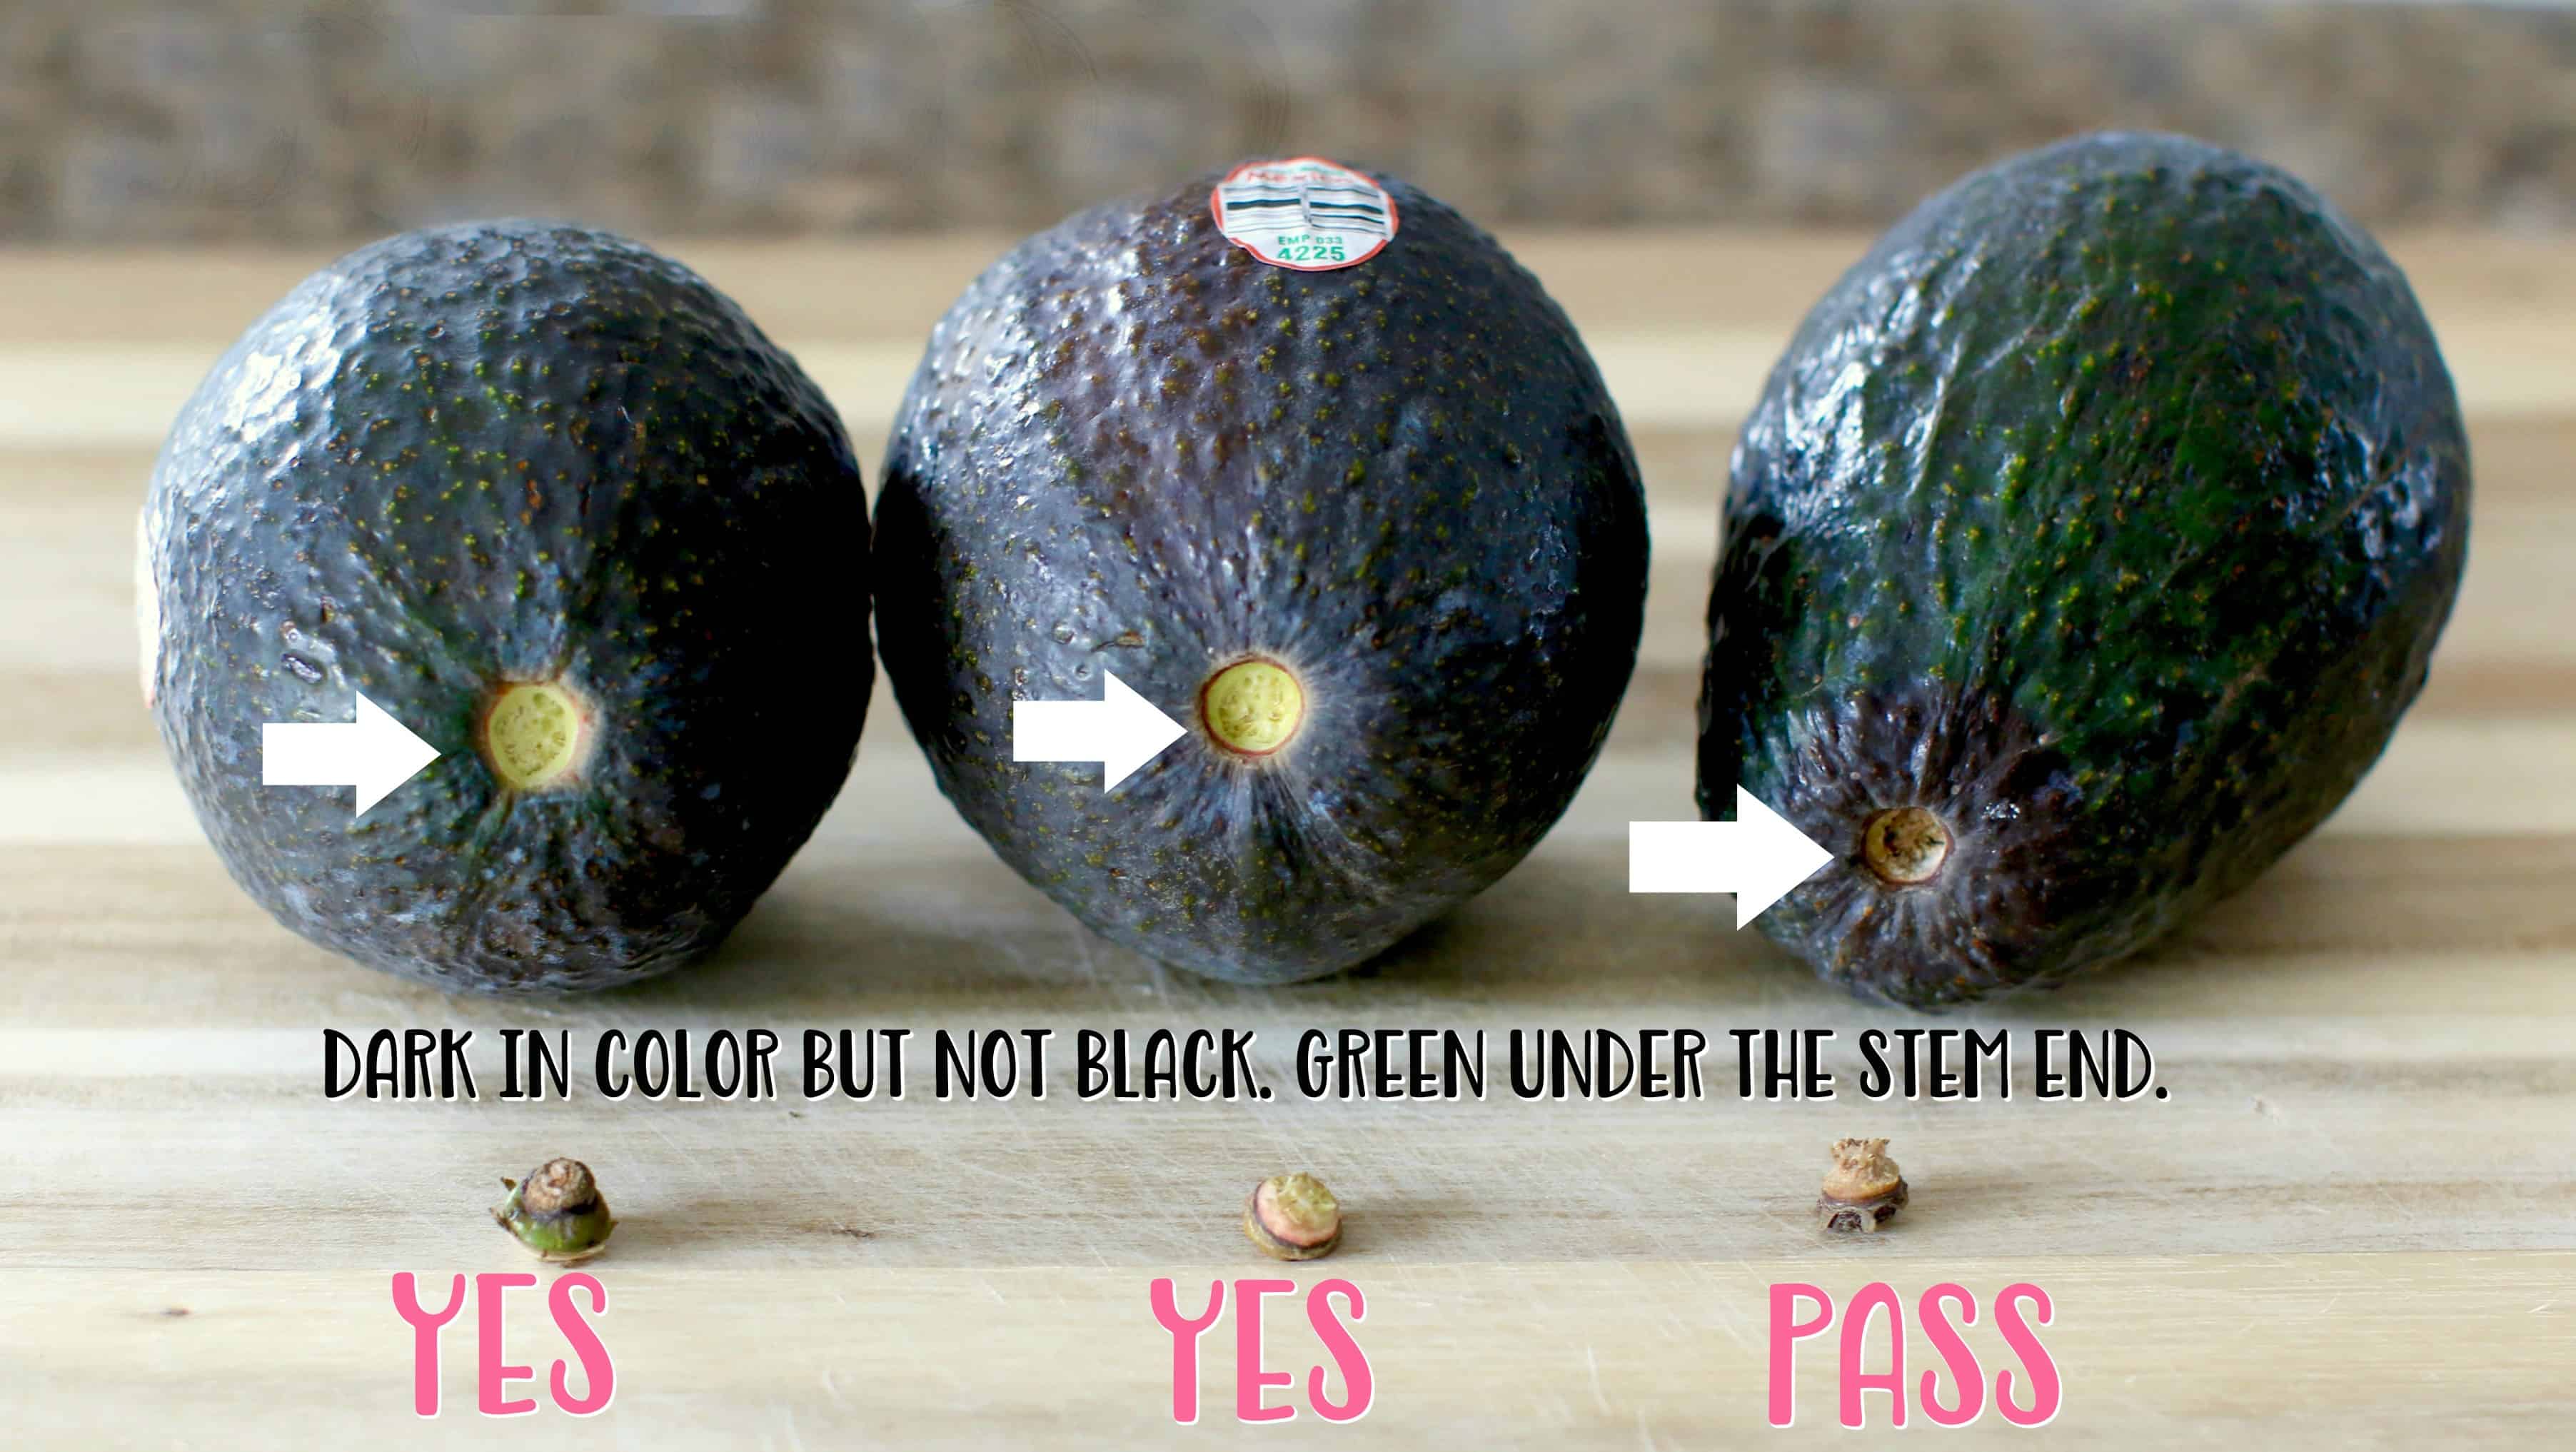 How to tell if an avocado is ripe. Photo showing three avocados at varying stages of ripeness.